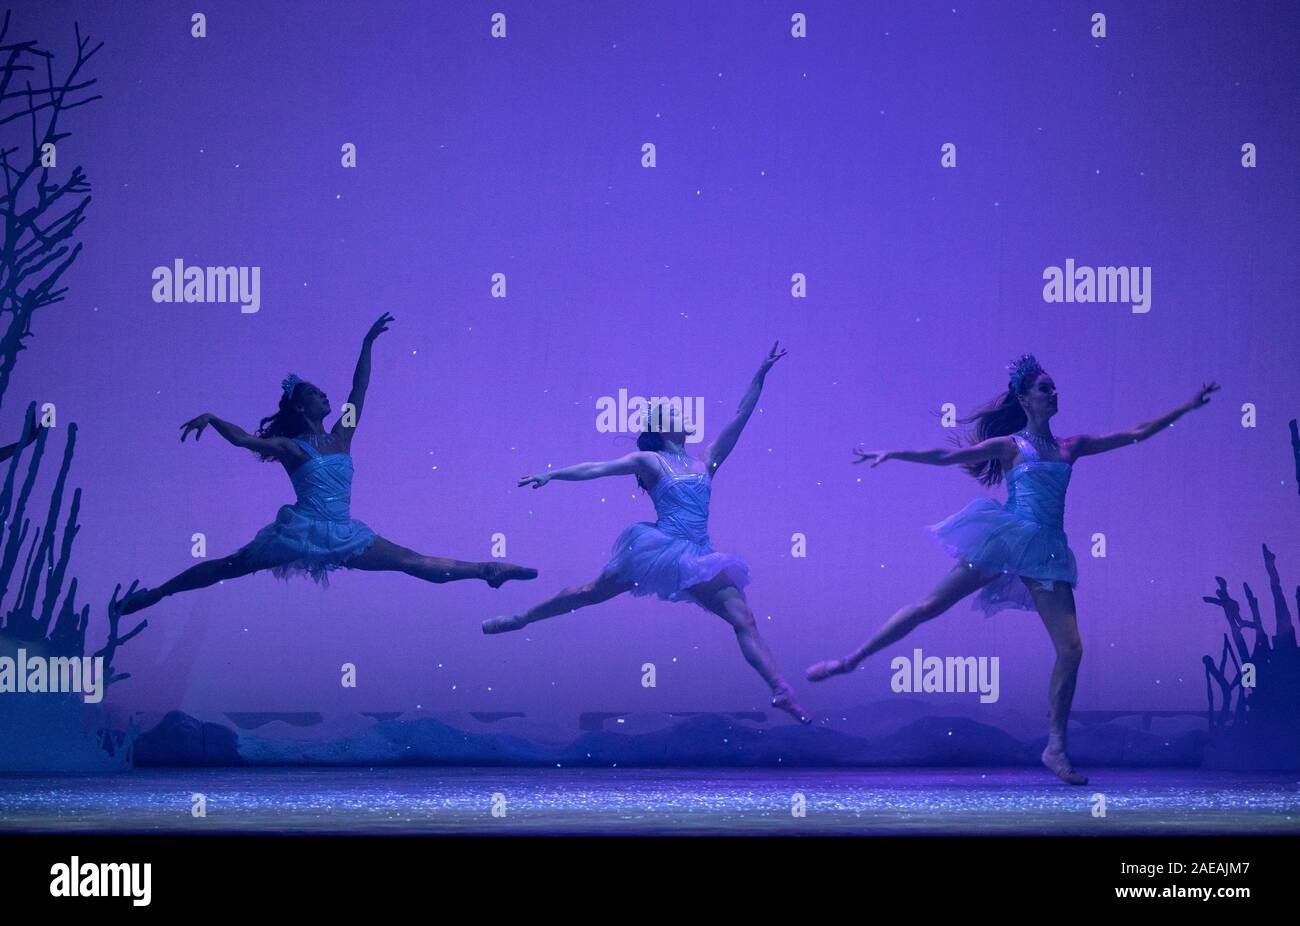 Members of the Scottish Ballet perform on stage during a dress rehearsal of The Snow Queen at Festival Theatre, Edinburgh. Inspired by Hans Christian Andersen's fairy tale, the ballet is set to the music of Rimsky-Korsakov performed by the Scottish Ballet Orchestra and runs until December 29, 2019. PA Photo. Picture date: Friday December 6, 2019. Photo credit should read: Jane Barlow/PA Wire Stock Photo